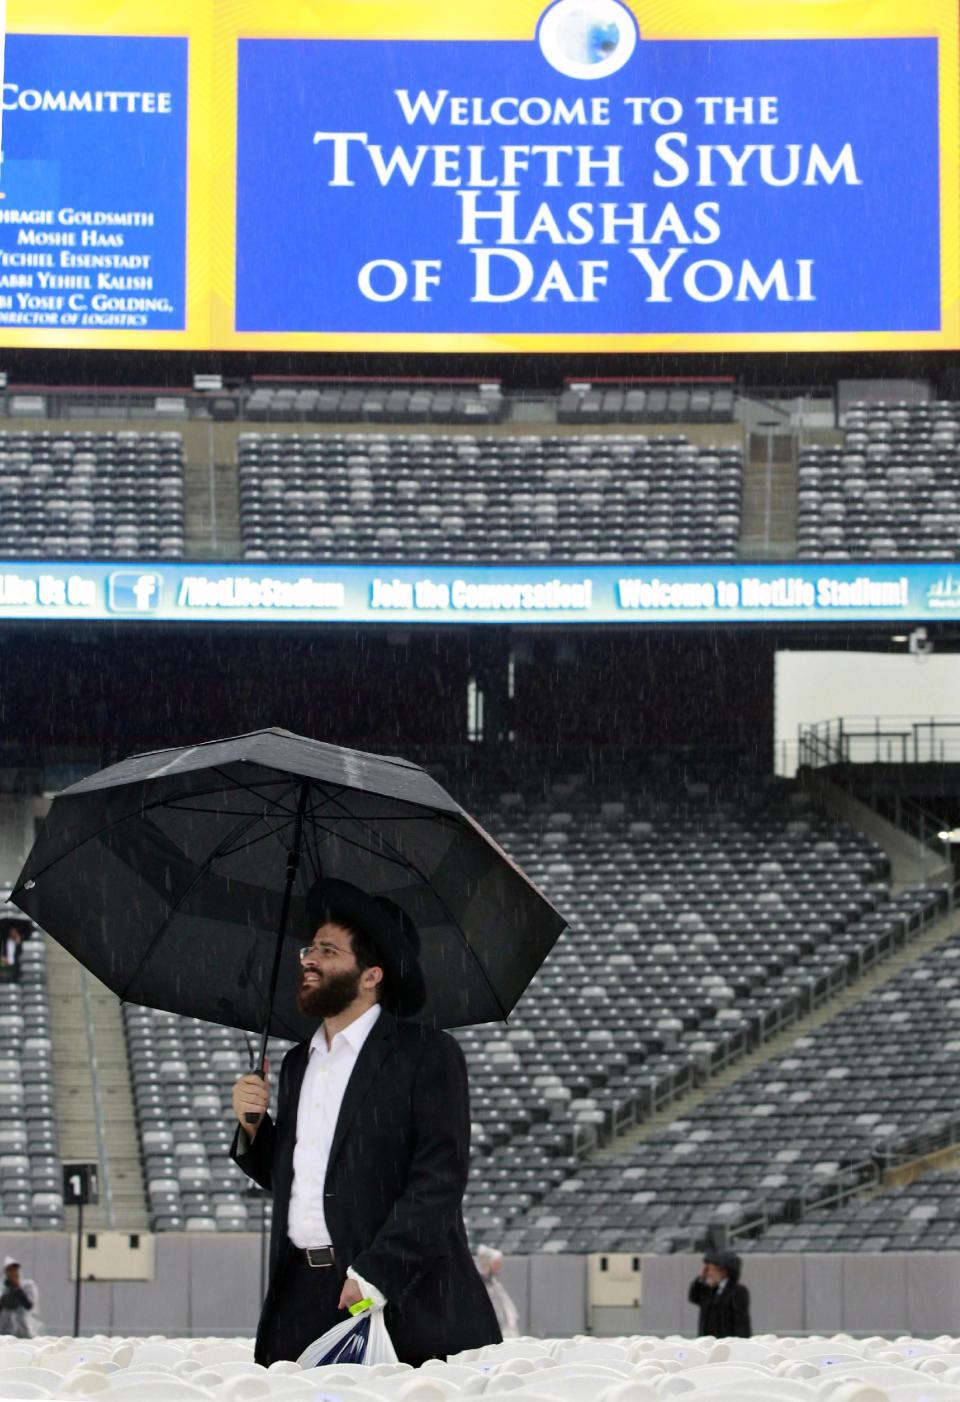 A man walks in the rain at MetLife stadium in East Rutherford, N.J, Wednesday, Aug. 1, 2012, as he waits for the start of the celebration Siyum HaShas. The Siyum HaShas, marks the completion of the Daf Yomi, or daily reading and study of one page of the 2,711 page book. The cycle takes about 7½ years to finish. This is the 12th put on my Agudath Israel of America, an Orthodox Jewish organization based in New York. Organizers say this year's will be, by far, the largest one yet. More than 90,000 tickets have been sold, and faithful will gather at about 100 locations worldwide to watch the celebration. (AP Photo/Mel Evans)